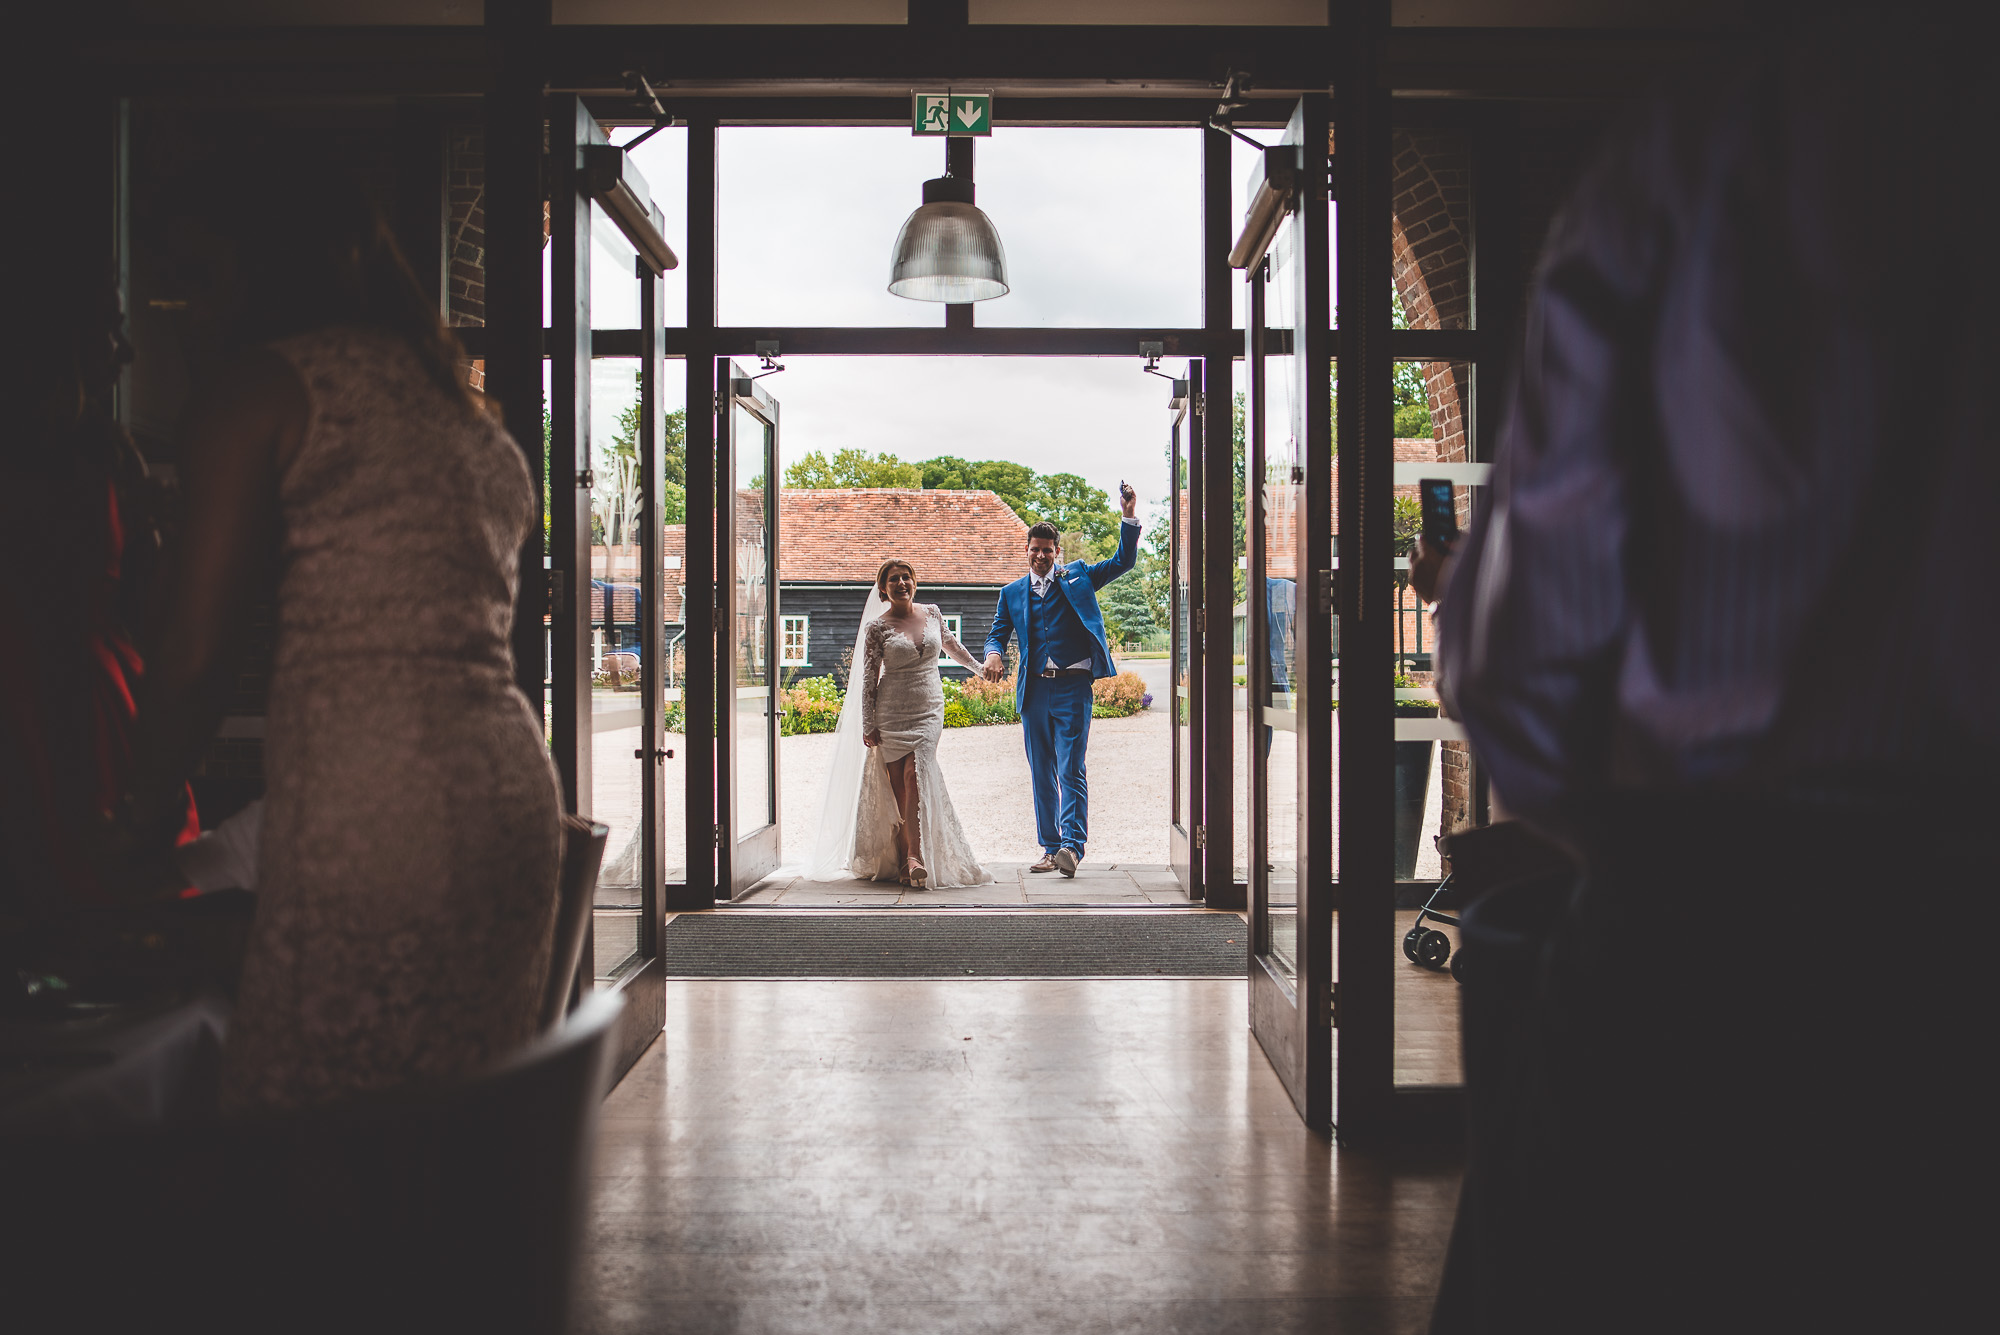 A bride and groom captured by a wedding photographer as they exit a doorway.